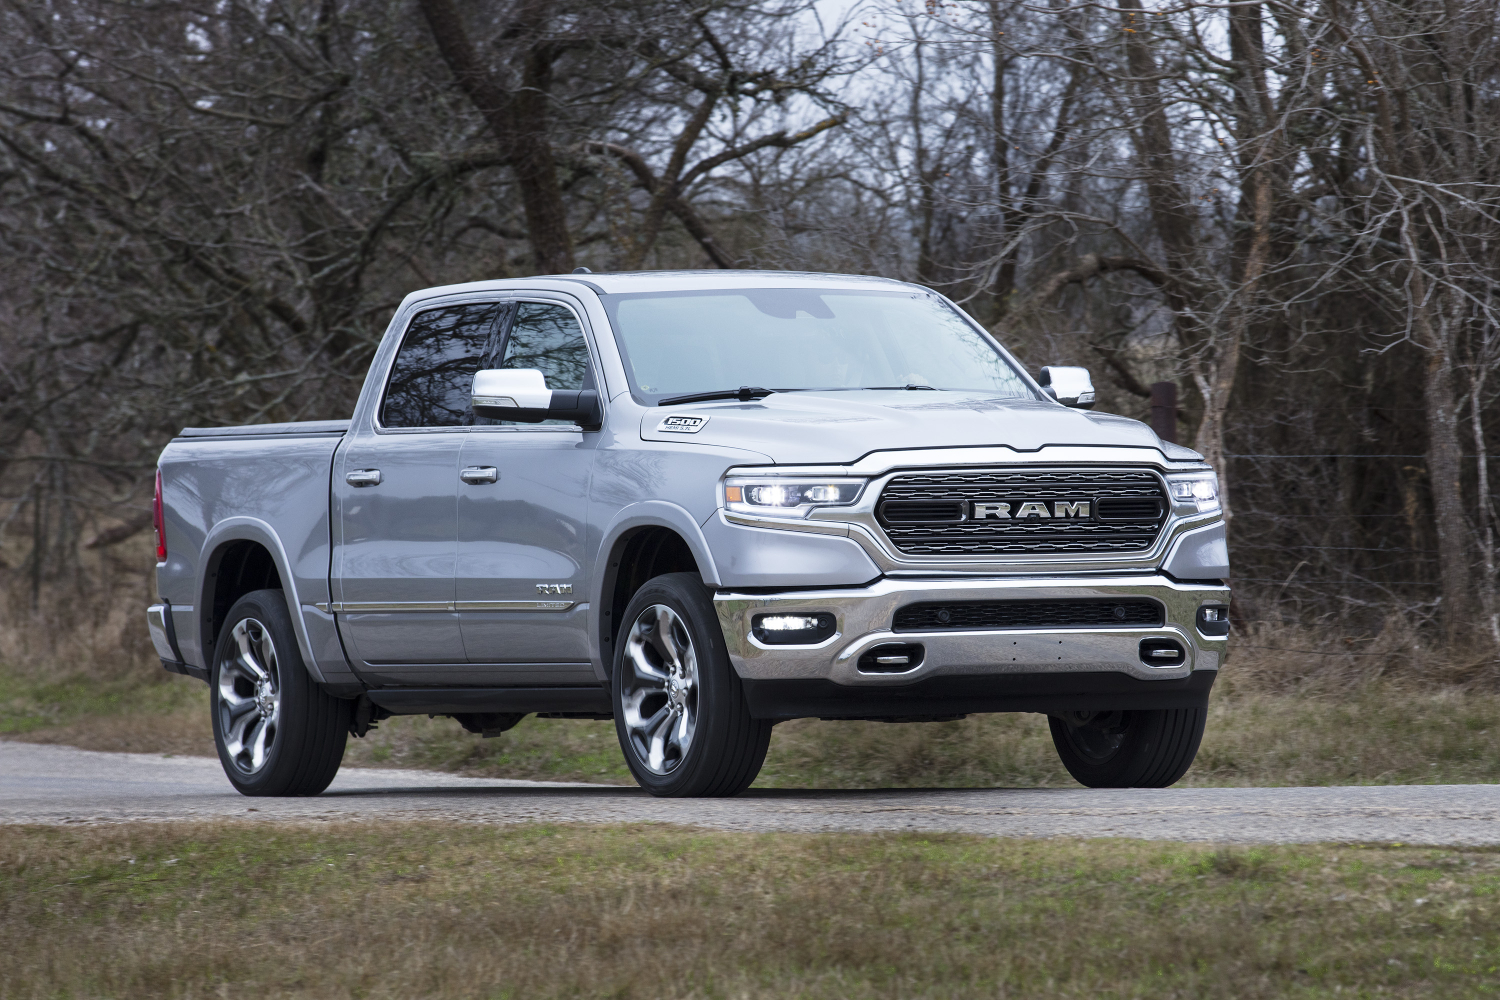 The 2022 Ram 1500 like the one pictured here and 2022 Nissan Titan are both full-size trucks